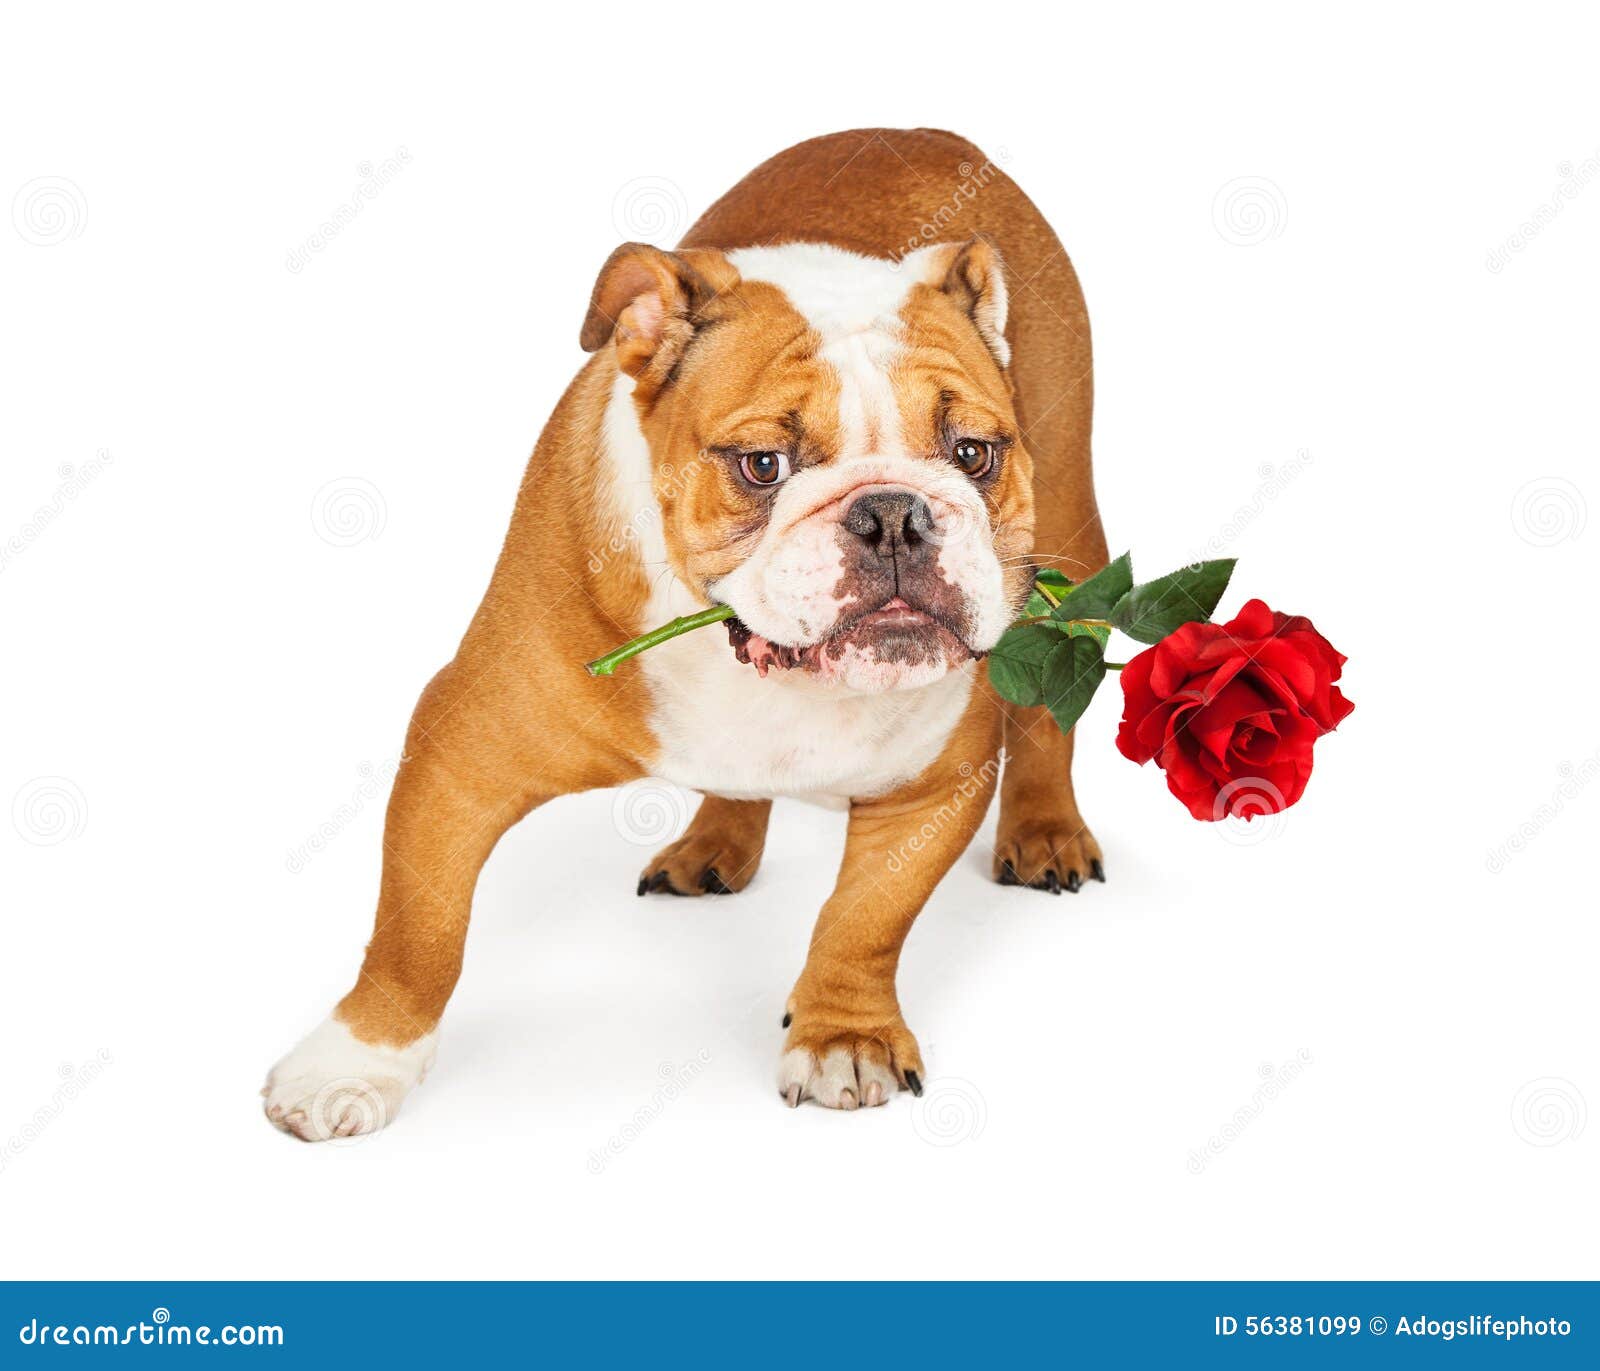 Bulldog Holding Red Rose in Mouth Stock Image - Image of cutout, holiday:  56381099